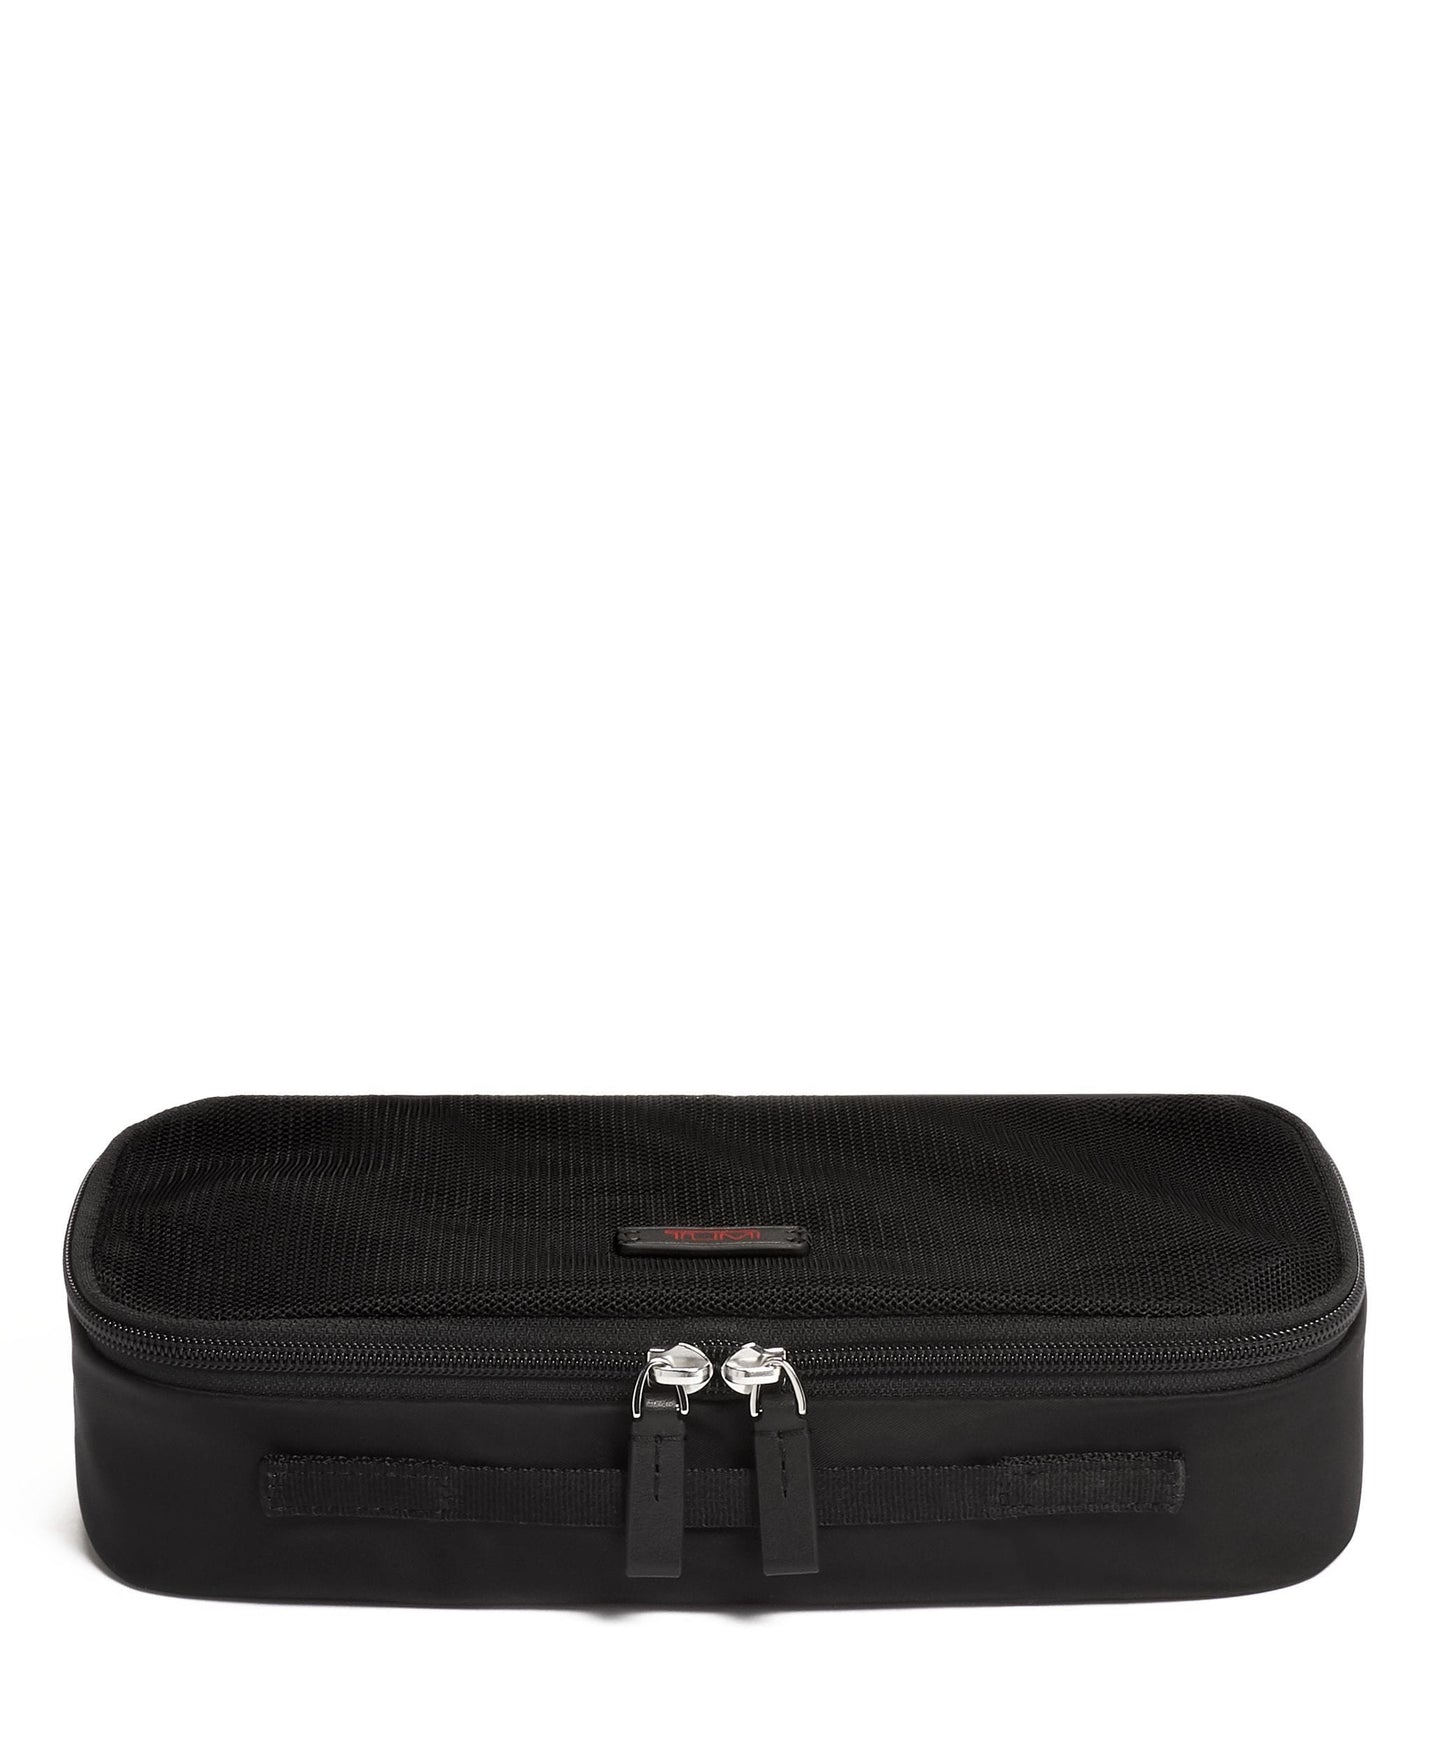 Slim Packing Cube Travel Accessory Collection